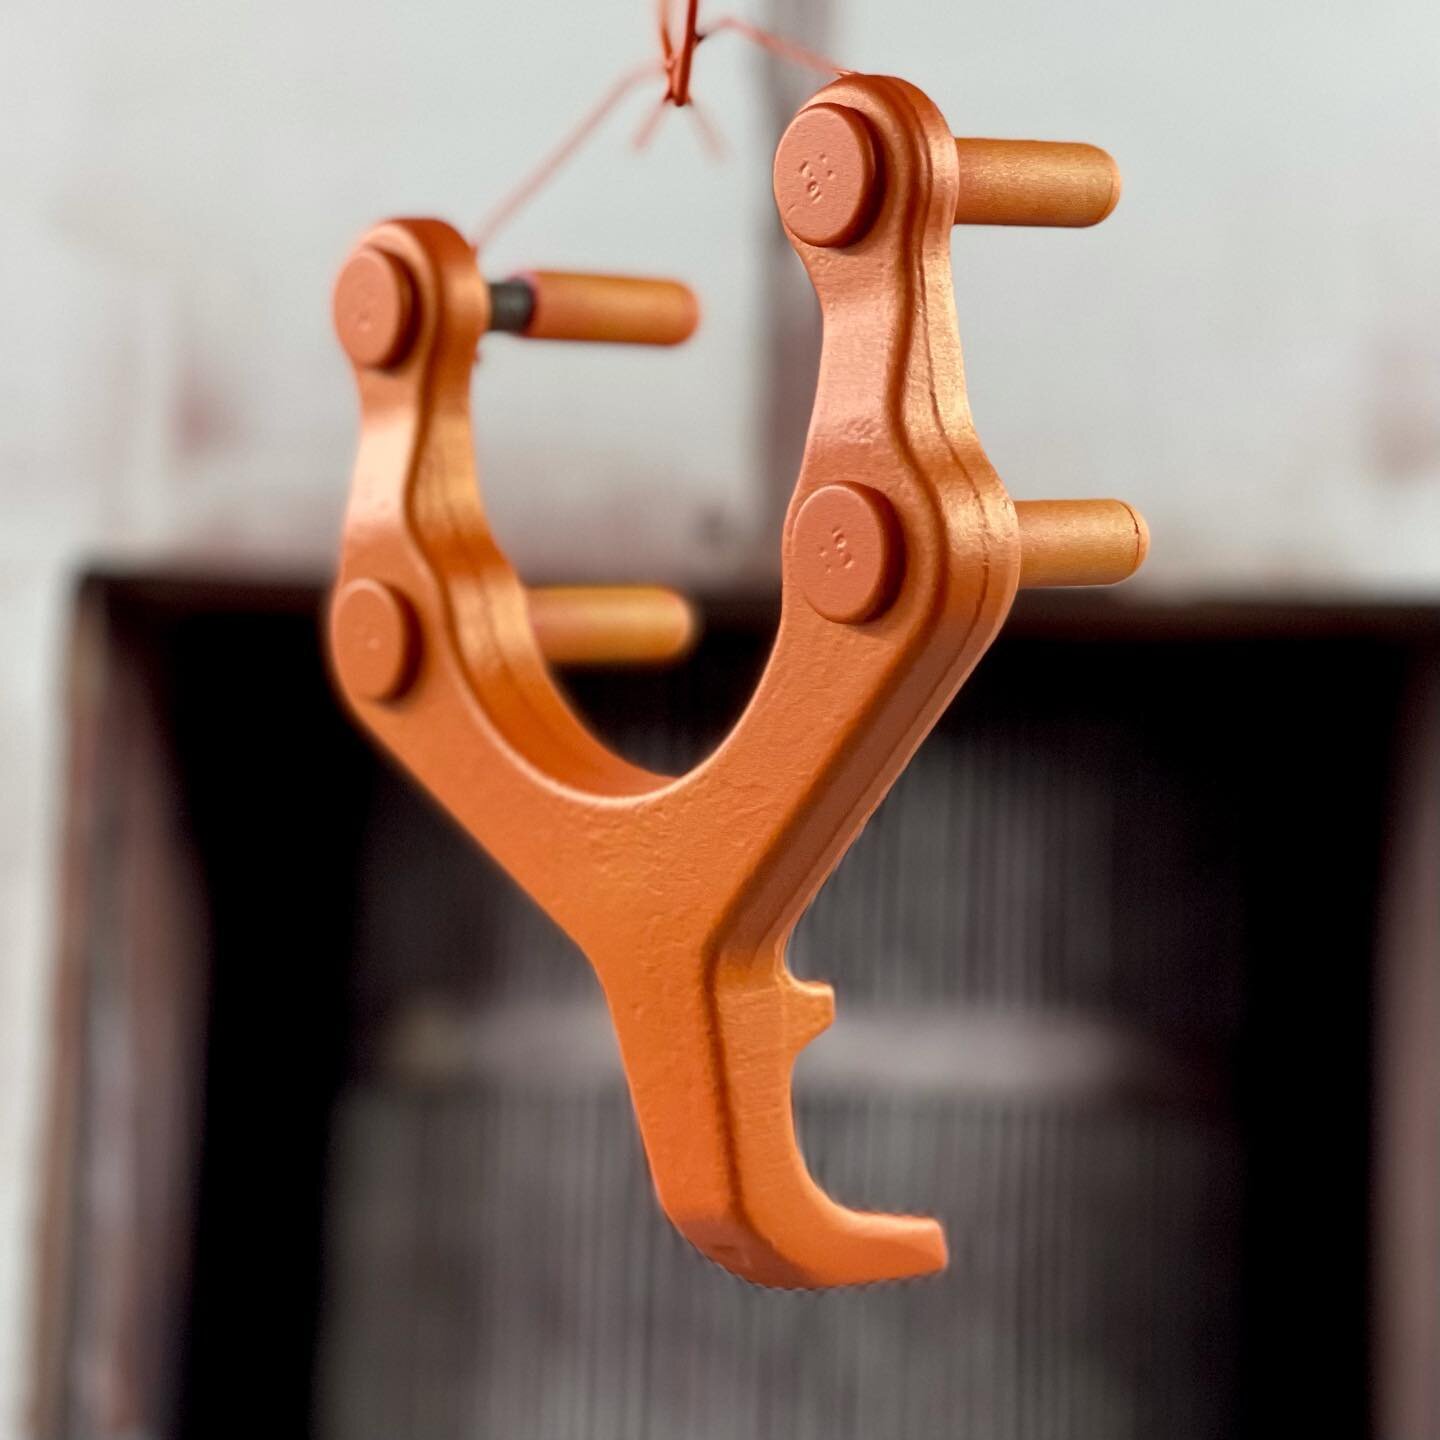 Nothing spices up a build like custom color tow hooks. We&rsquo;ve got almost every factory color matched including #snazzberry and custom options are always on the table like this matte metallic orange. We even have extra hooks available to swap out